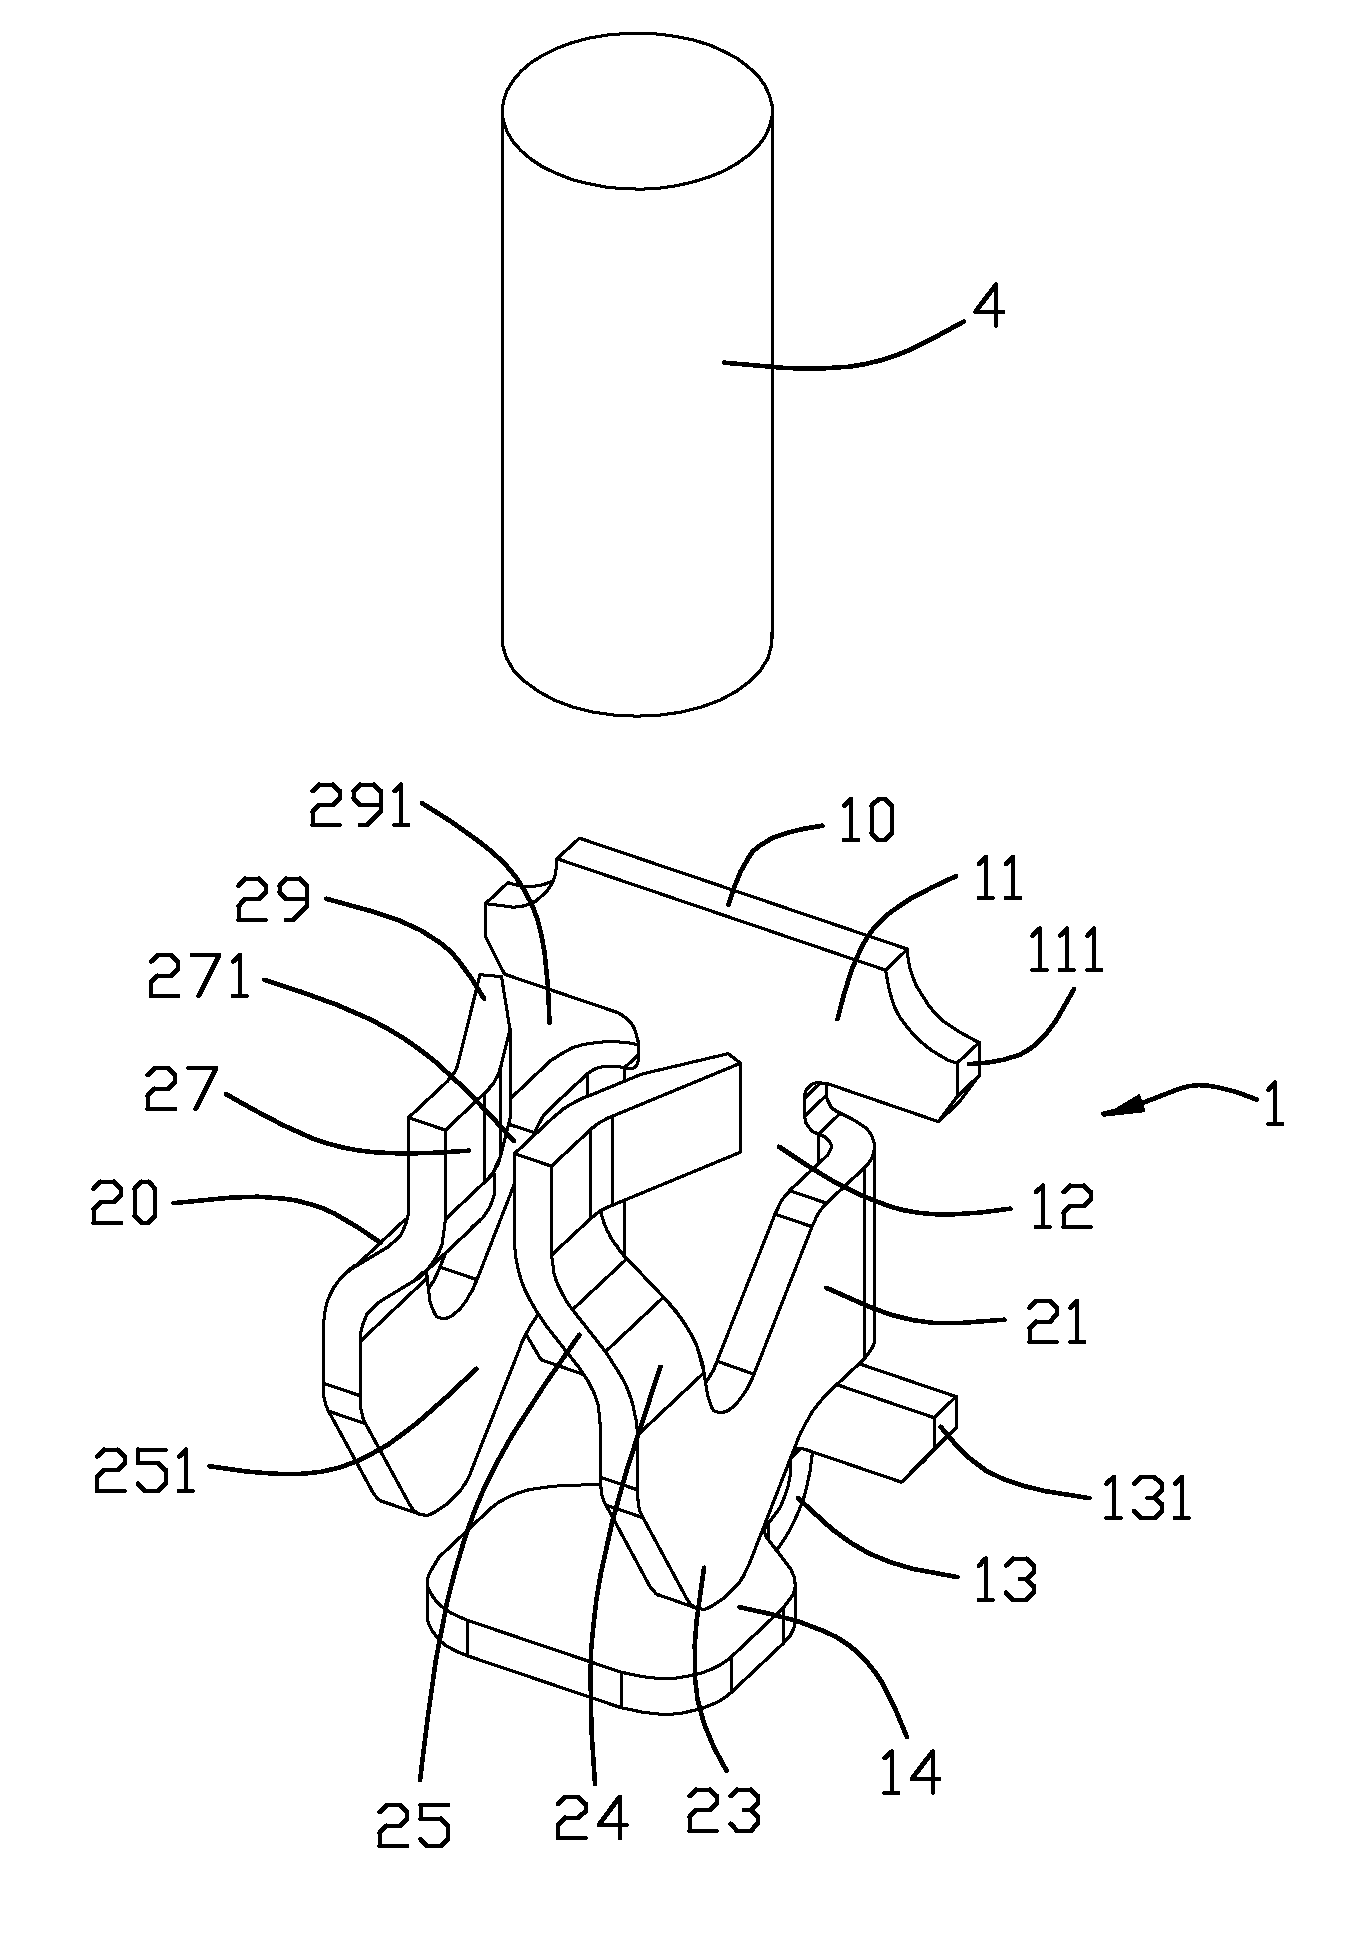 Socket connector having contact terminals with reliable and durable interconnection with pin legs of a CPU